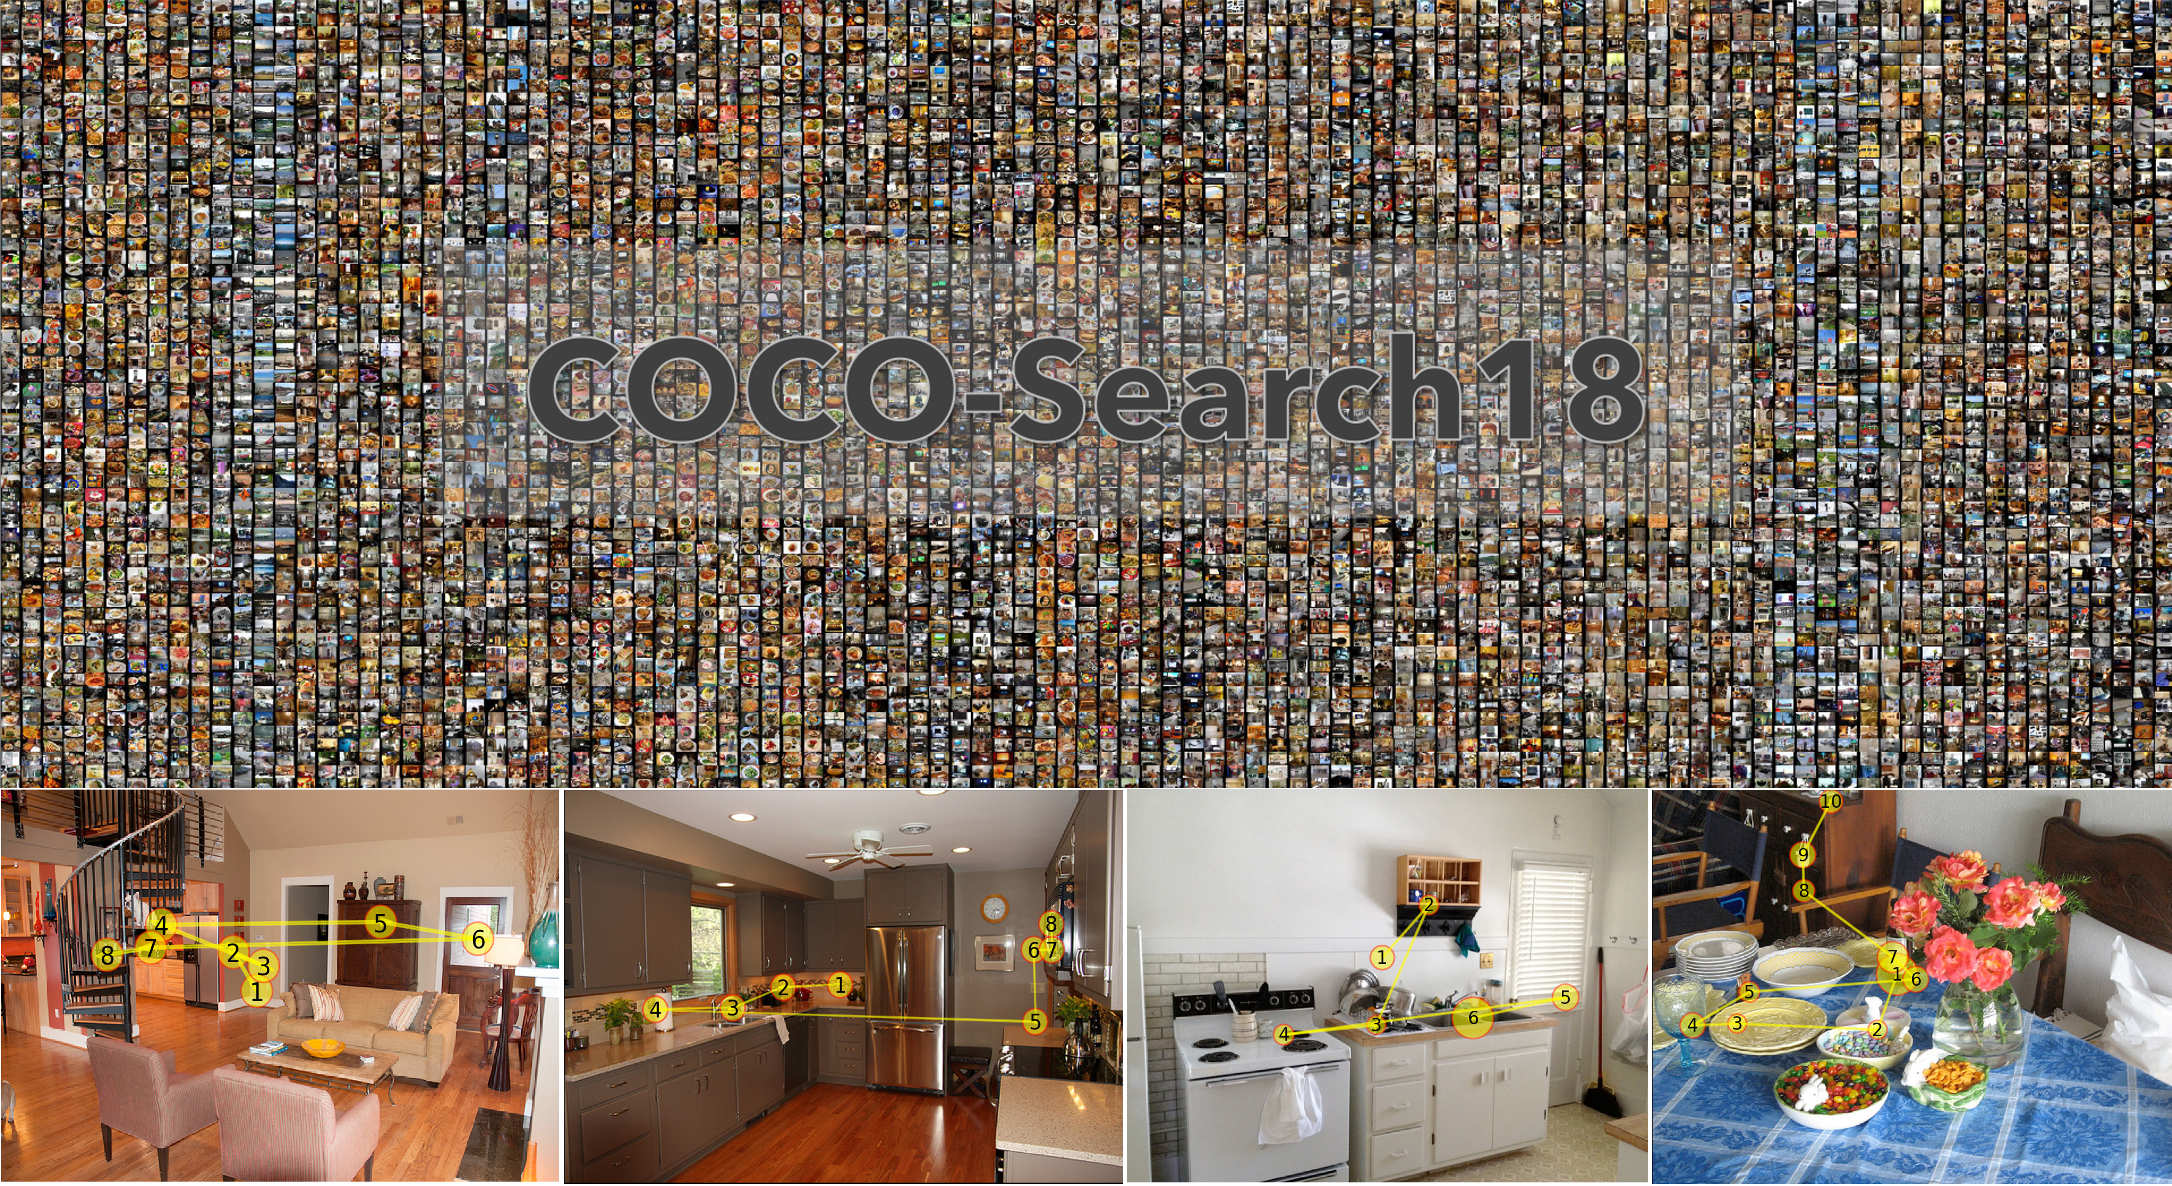 coco_search18_logo.png